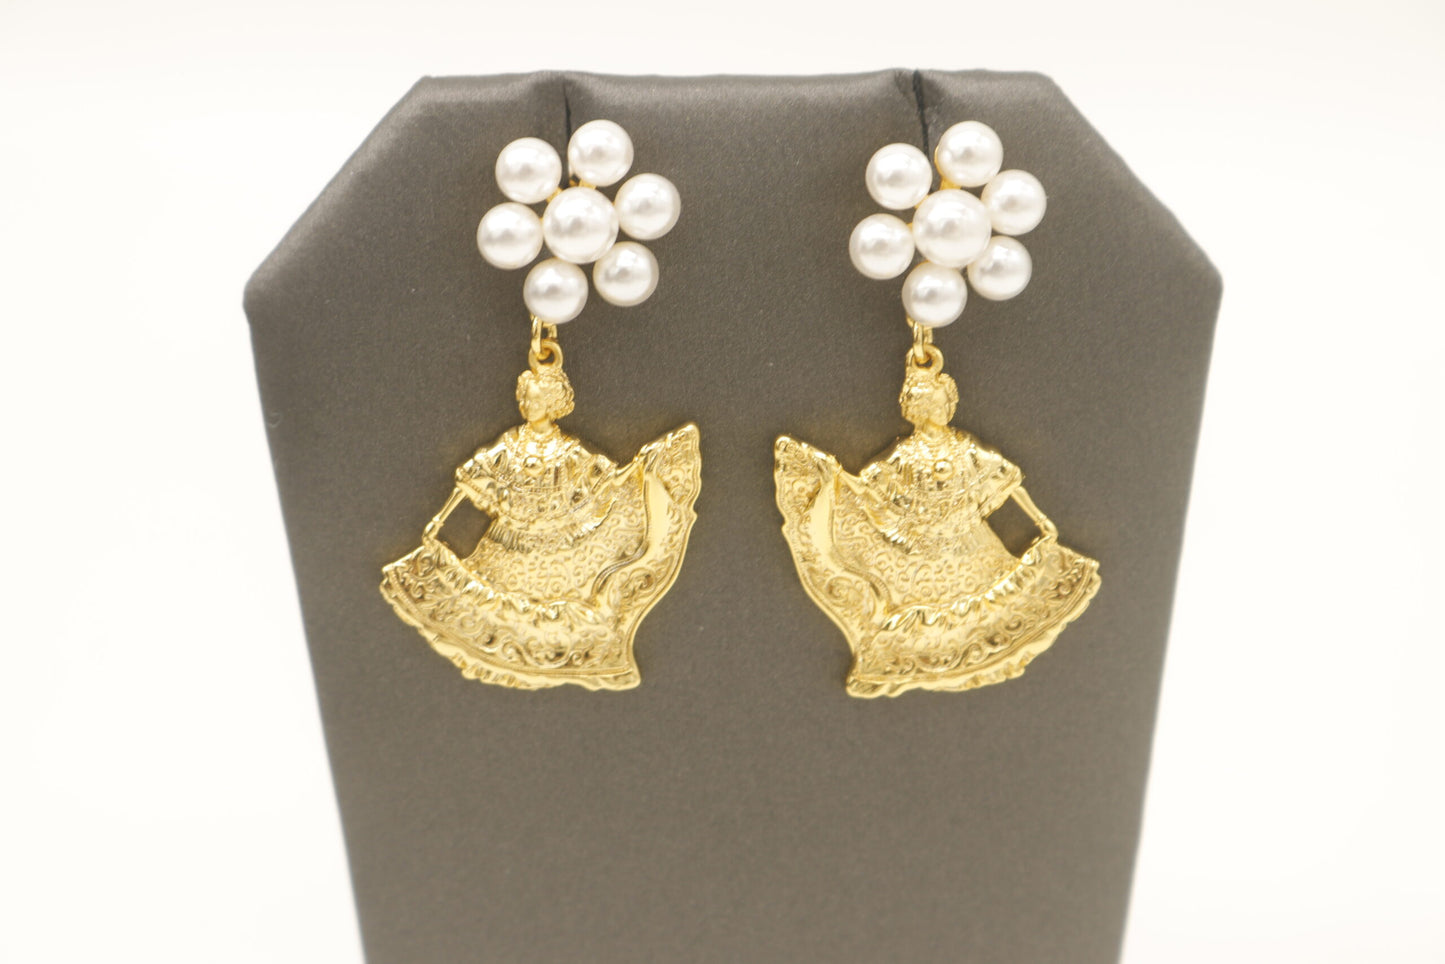 seven pearl pollera dancer earrings in gold with pearls